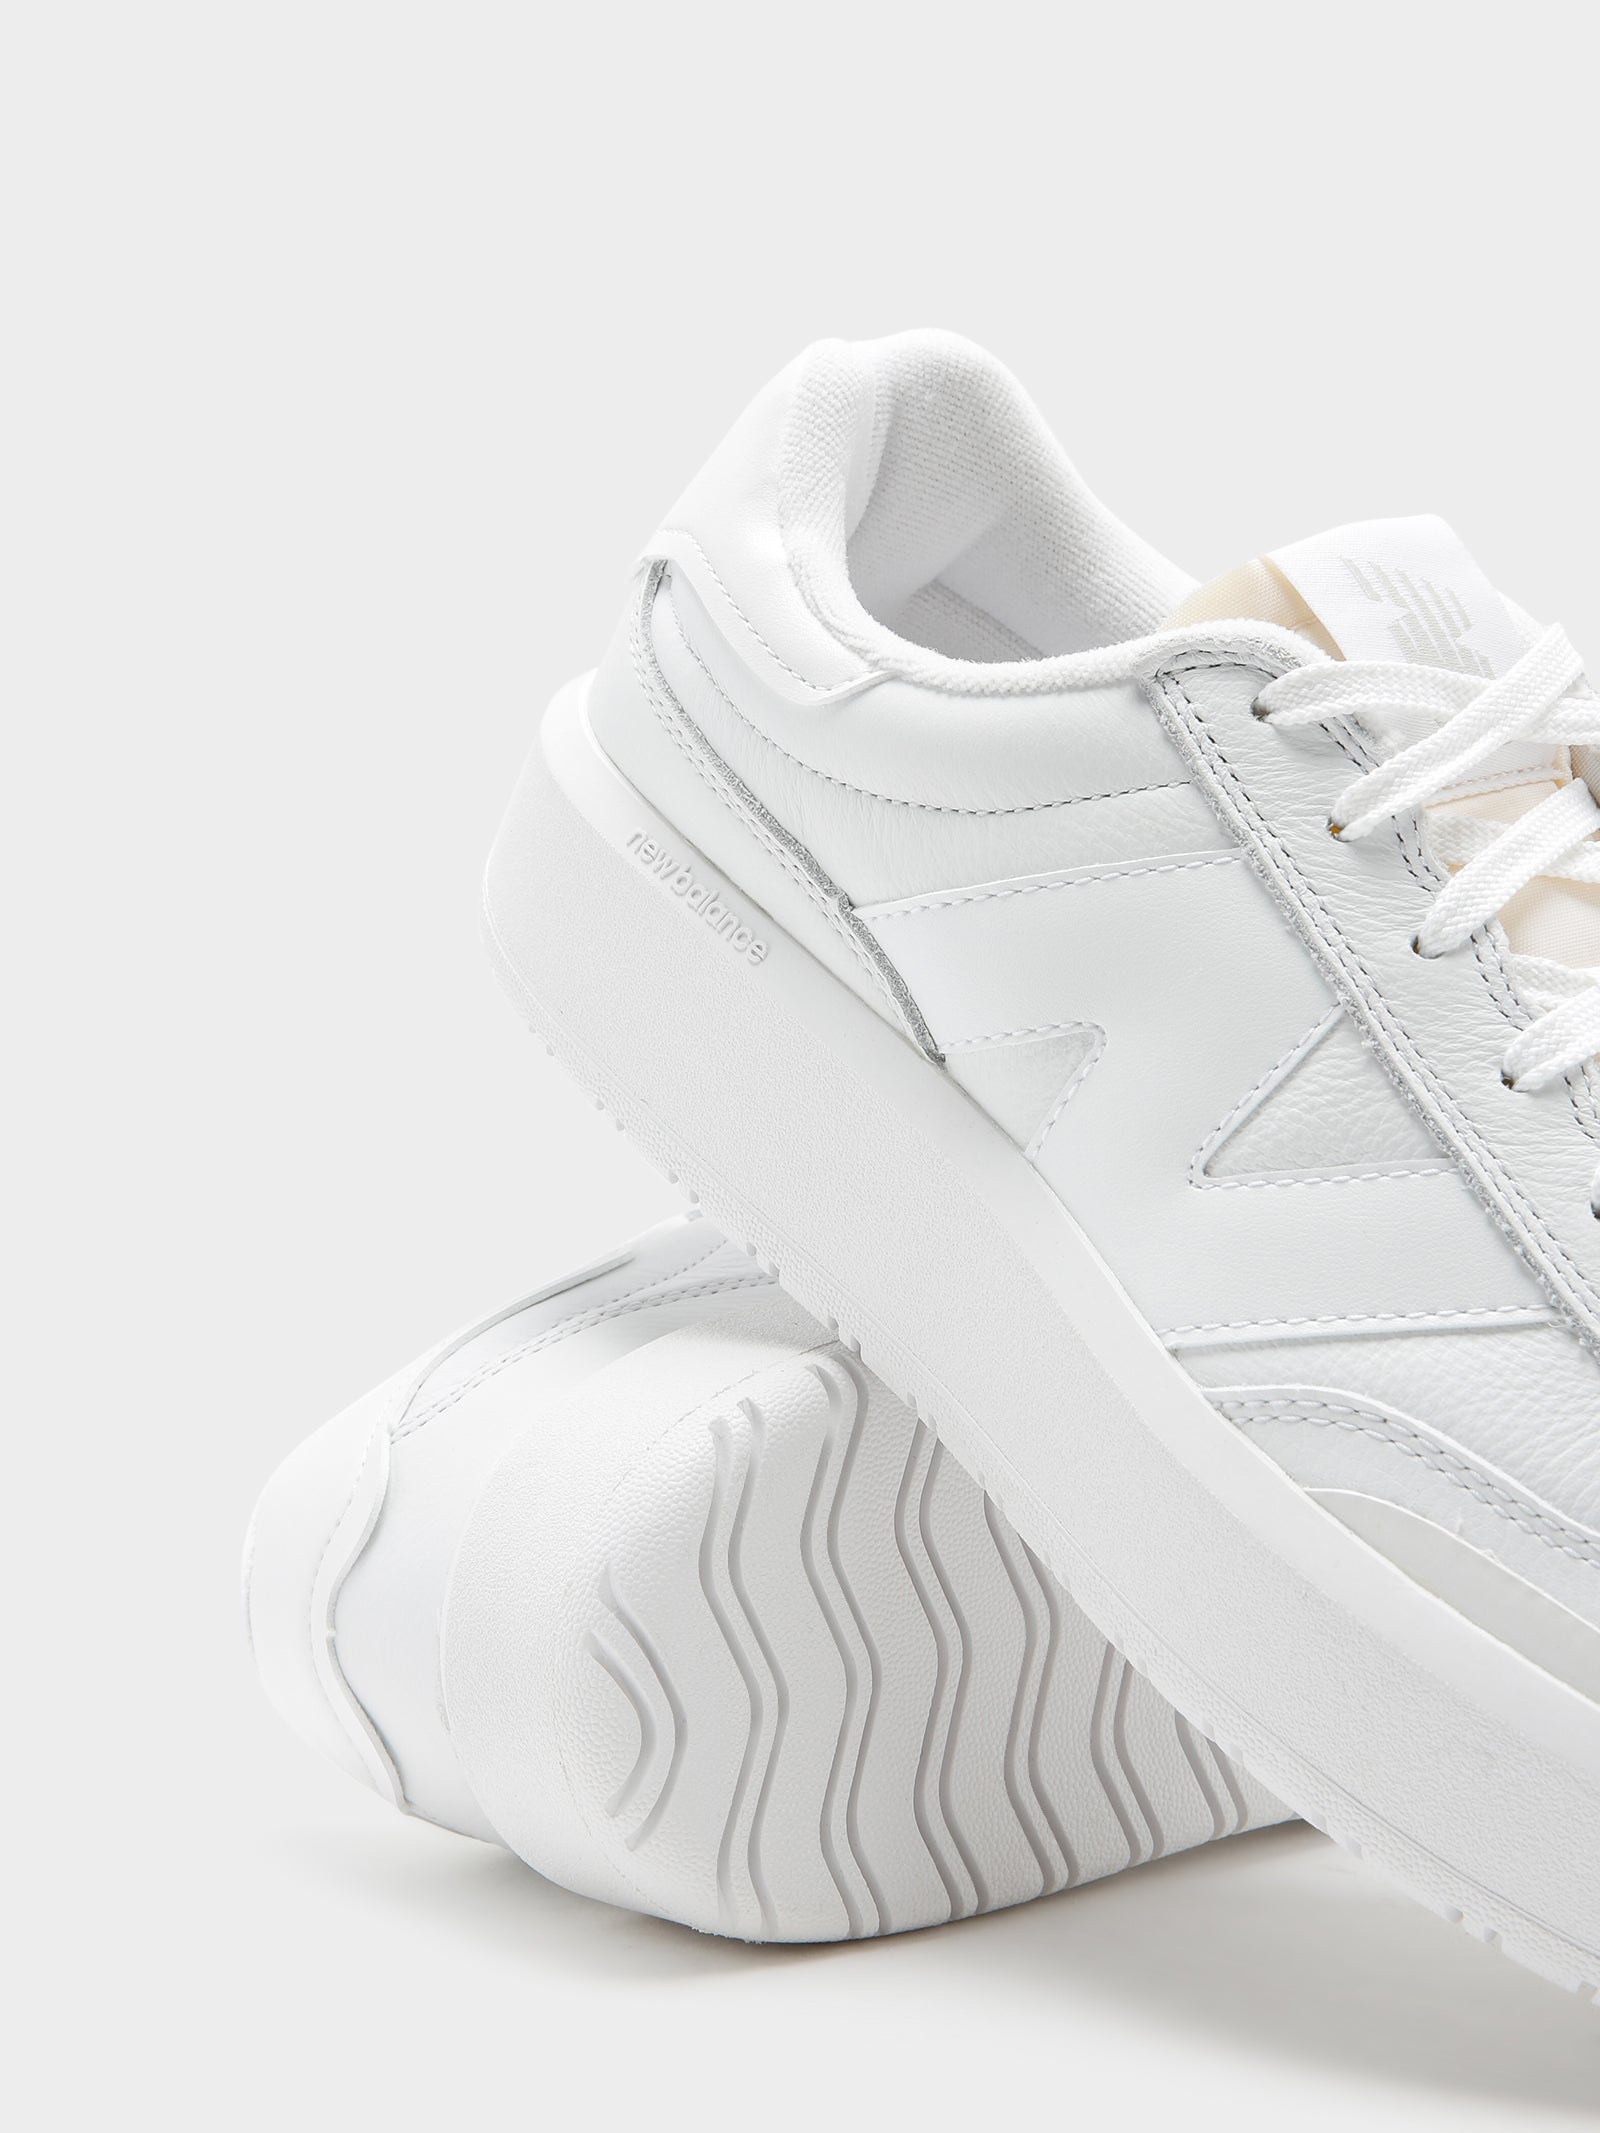 Unisex CT302 Sneakers in White